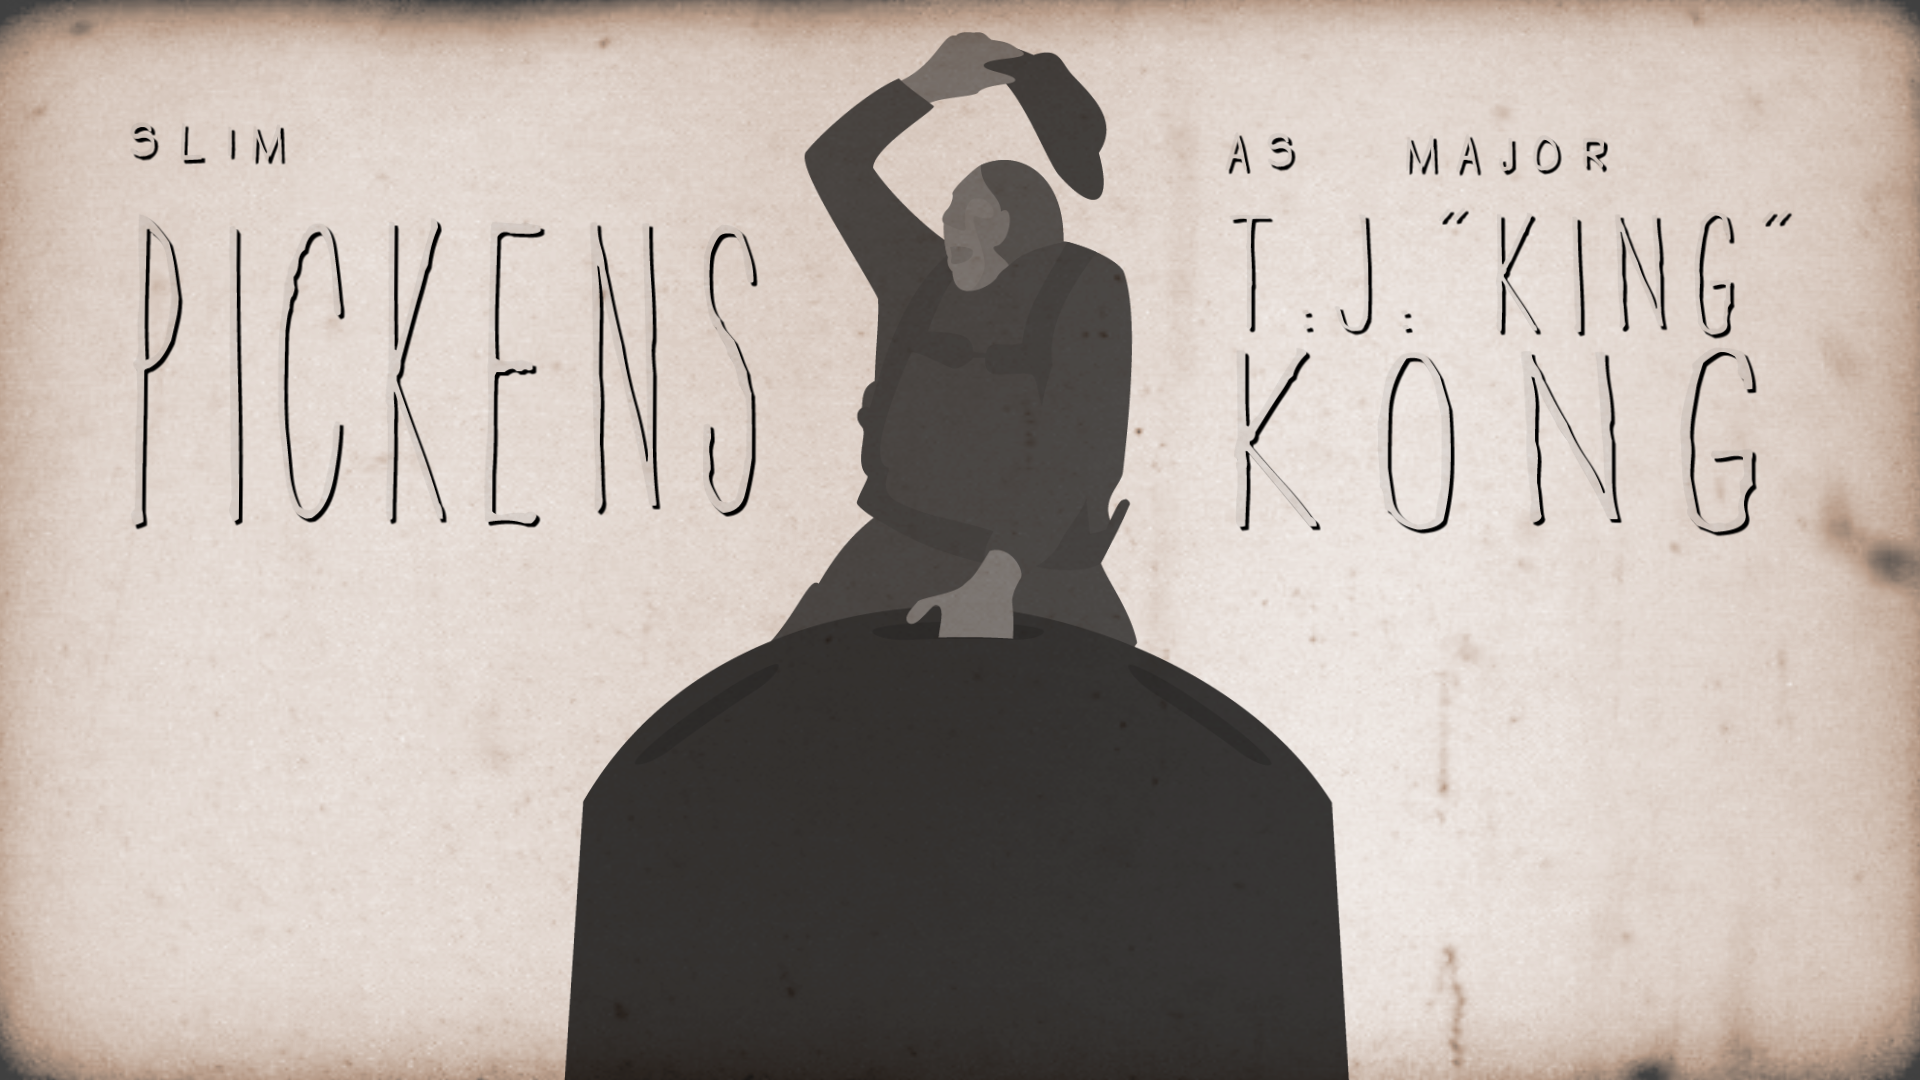 Screenshot of an animated intro to Dr. Strangelove. A man in pilot uniform sits on top of a bomb and waves his hat in the air. Next to him the text: 'Slim Pickens As Major T.J. King Kong'. The image has a white background and some film grain on top of it.